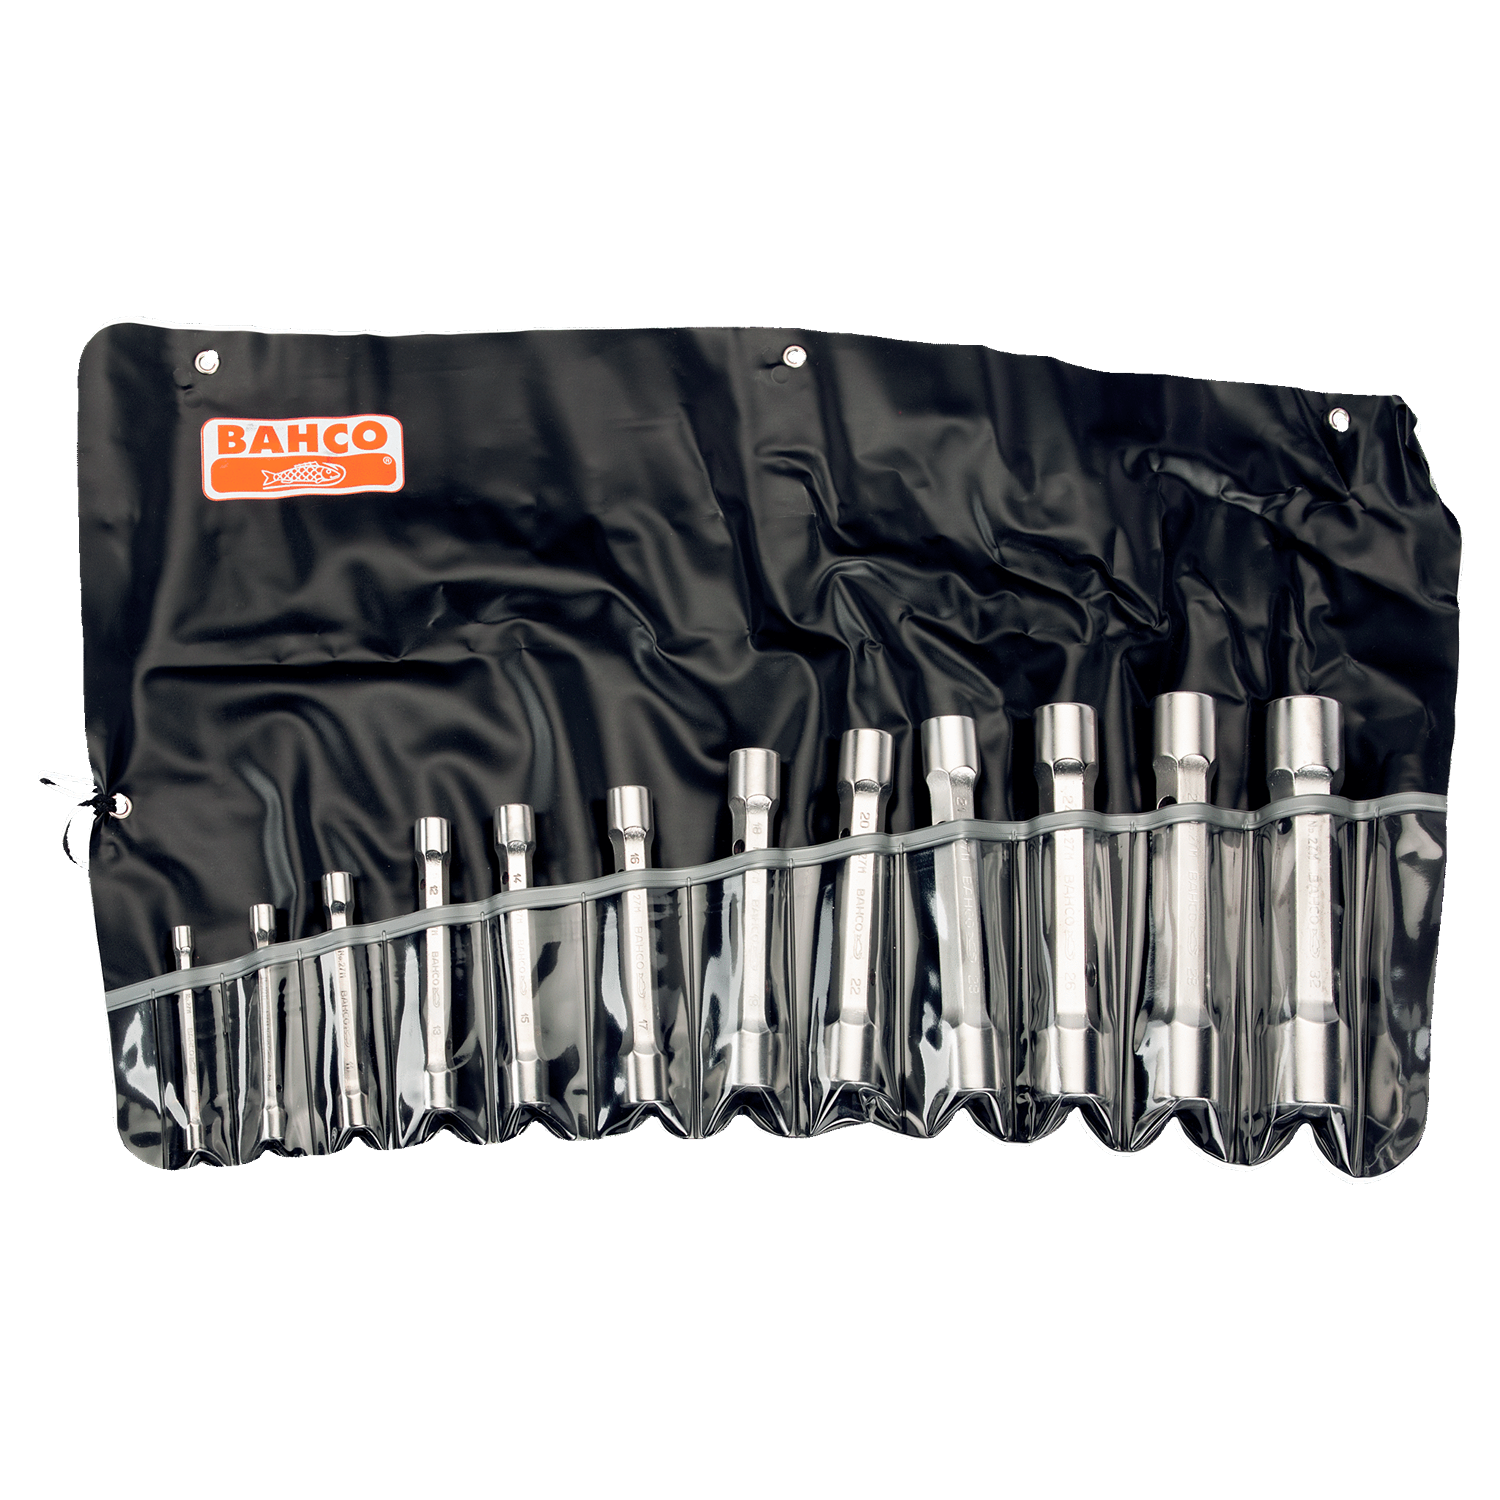 BAHCO 27M/12T Metric Double Head Socket Wrench Set - 12 Pcs - Premium Socket Wrench Set from BAHCO - Shop now at Yew Aik.